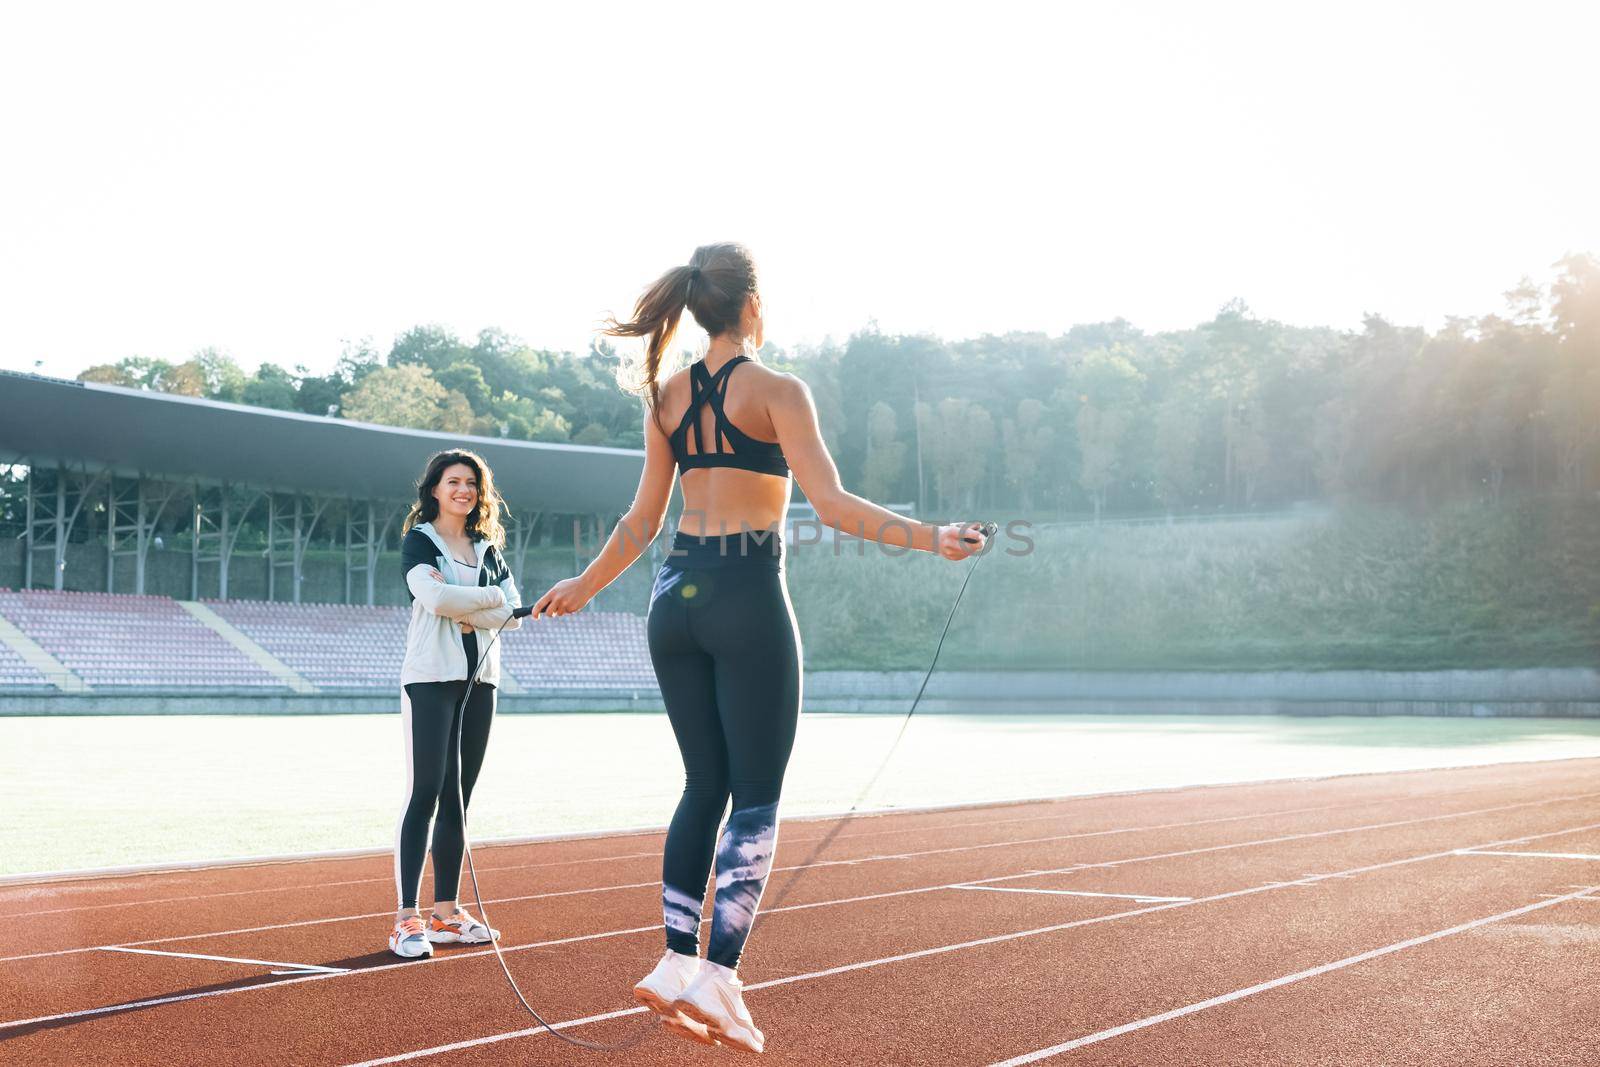 Caucasian woman with personal trainer jumping rope as part of her fitness workout. Sporty female with a good figure jumps rope on sports track of stadium. Exercising strength cardio and power by uflypro